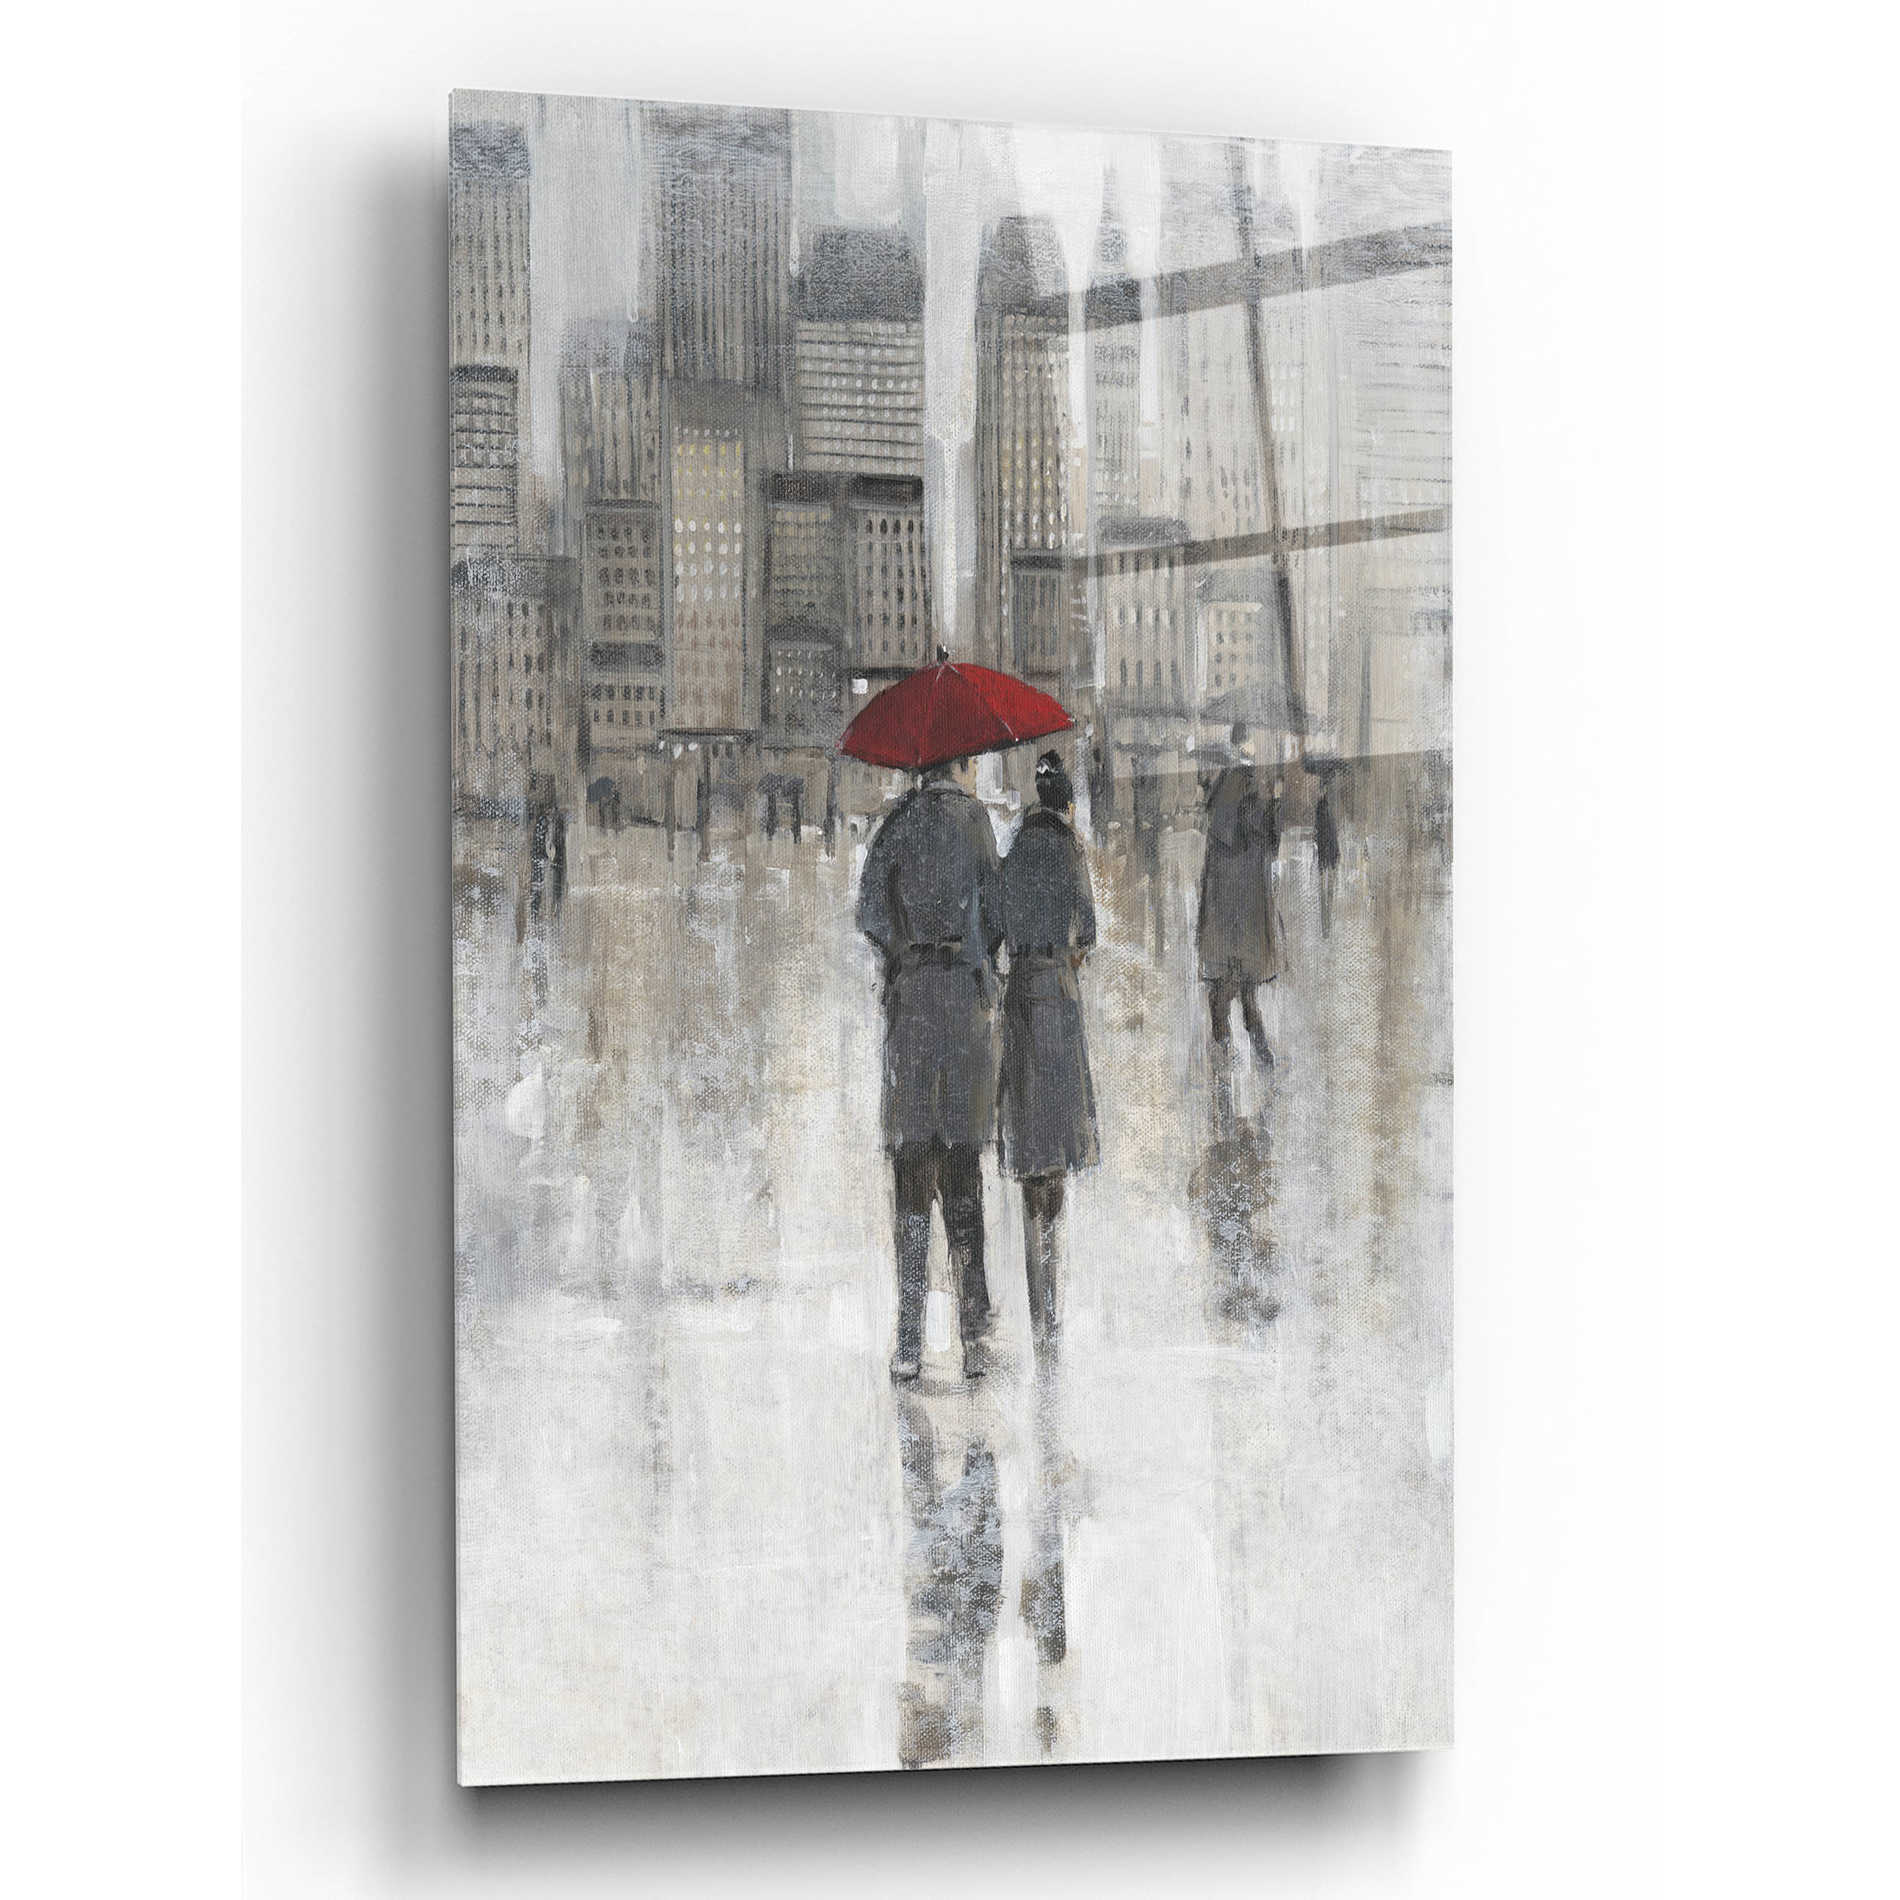 Epic Art 'Rain in The City I' by Tim O'Toole, Acrylic Glass Wall Art